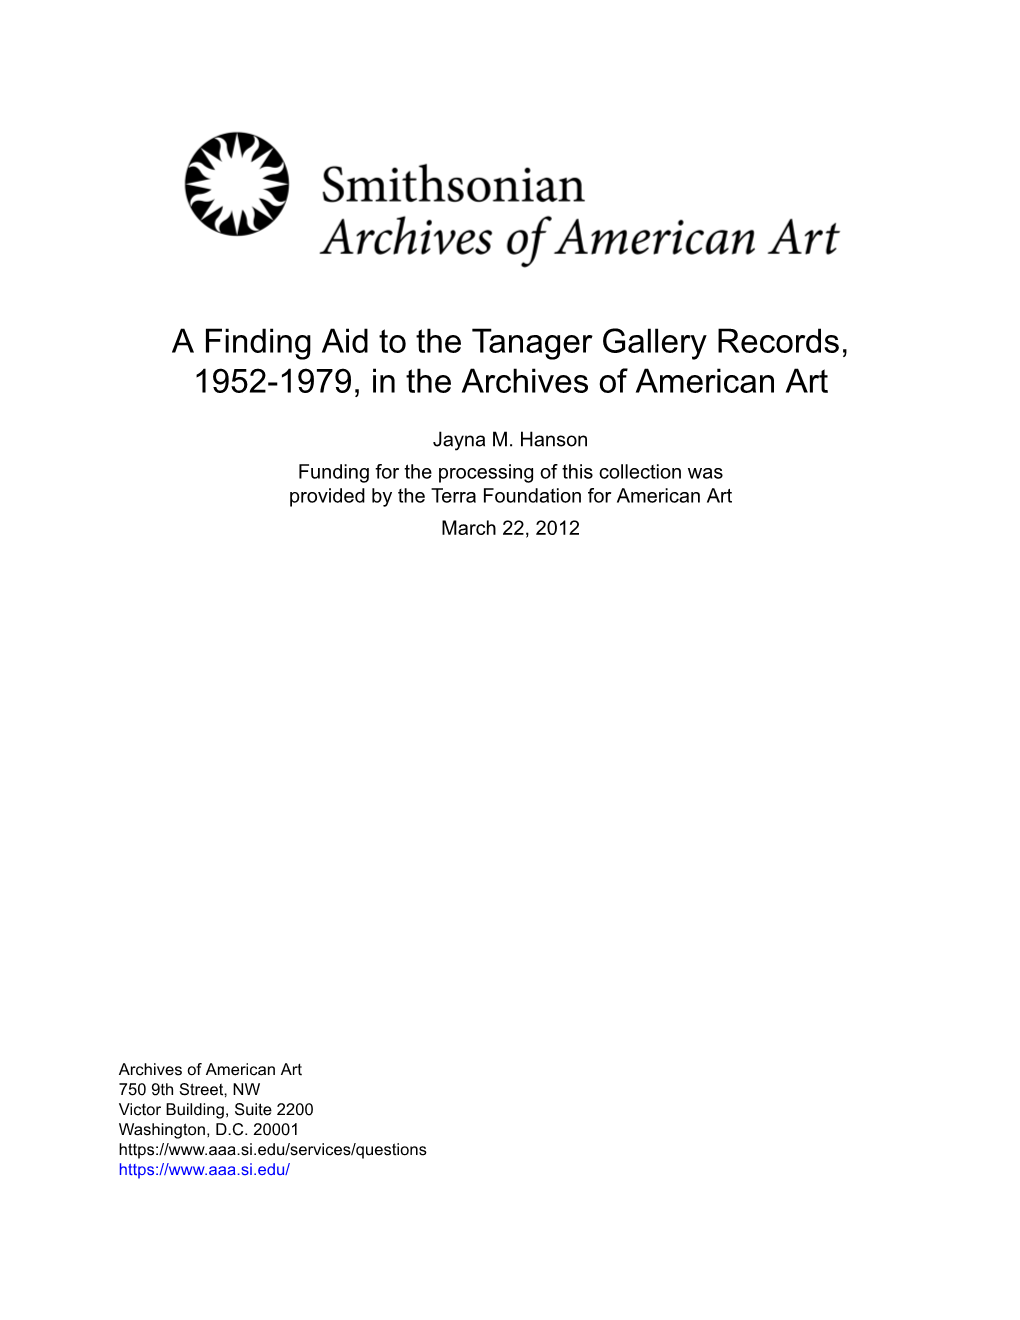 A Finding Aid to the Tanager Gallery Records, 1952-1979, in the Archives of American Art